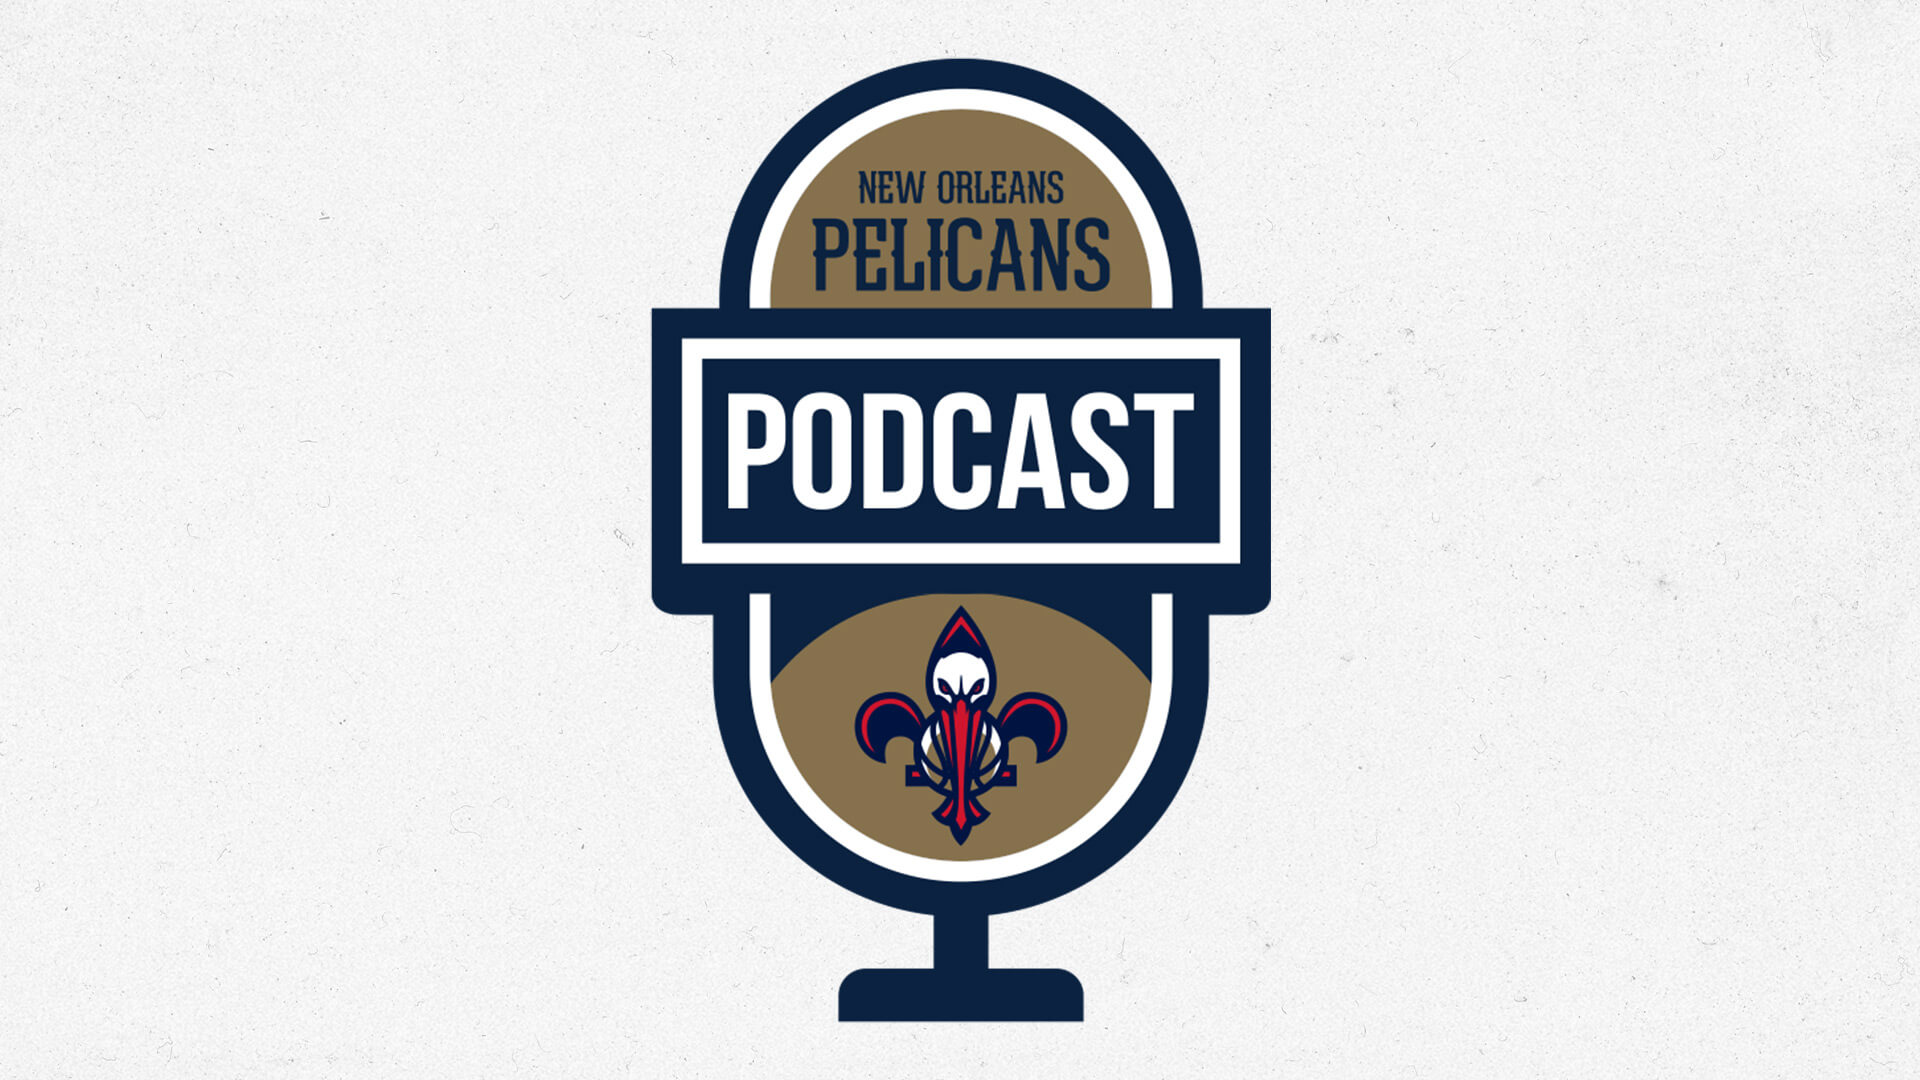 Mayor LaToya Cantrell on the New Orleans Pelicans podcast presented by SeatGeek - July 7, 2020